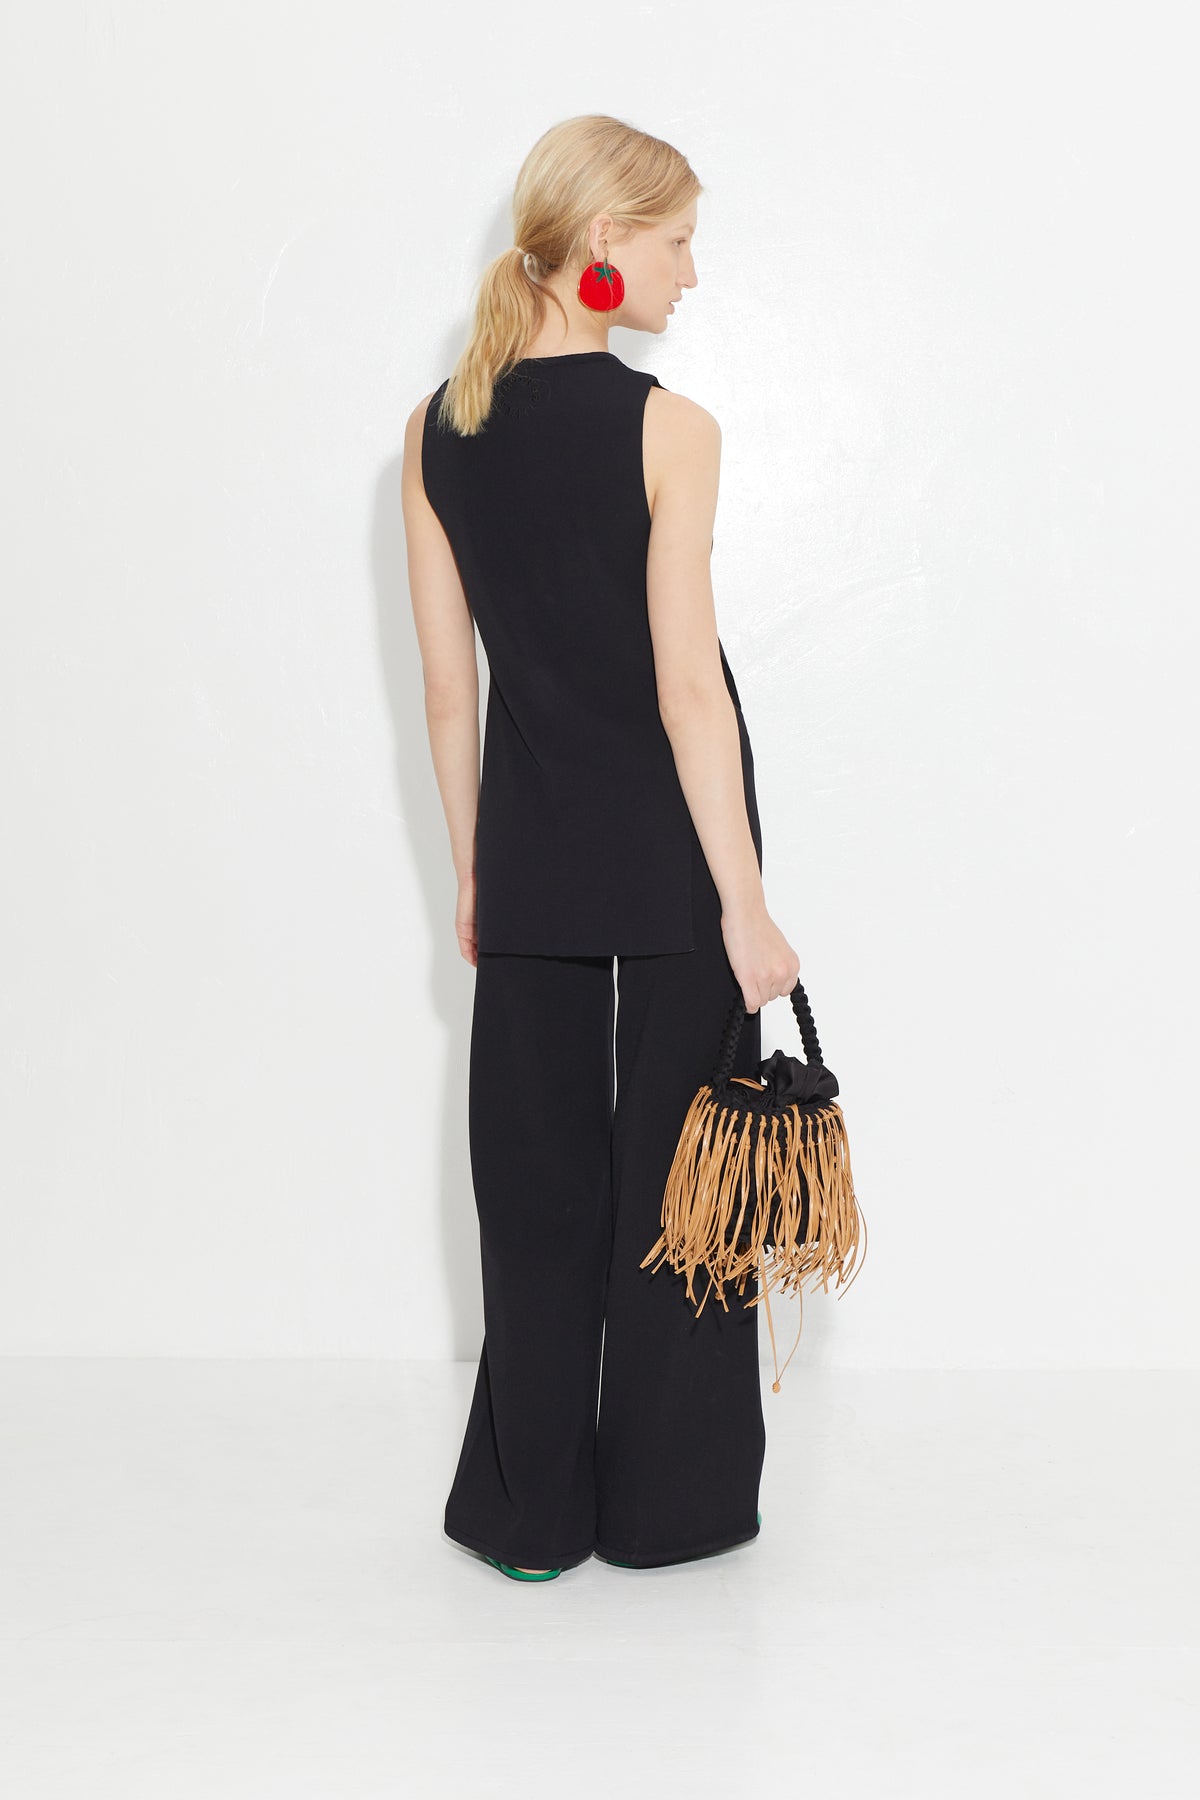 Knits By Jabber Pant in Black